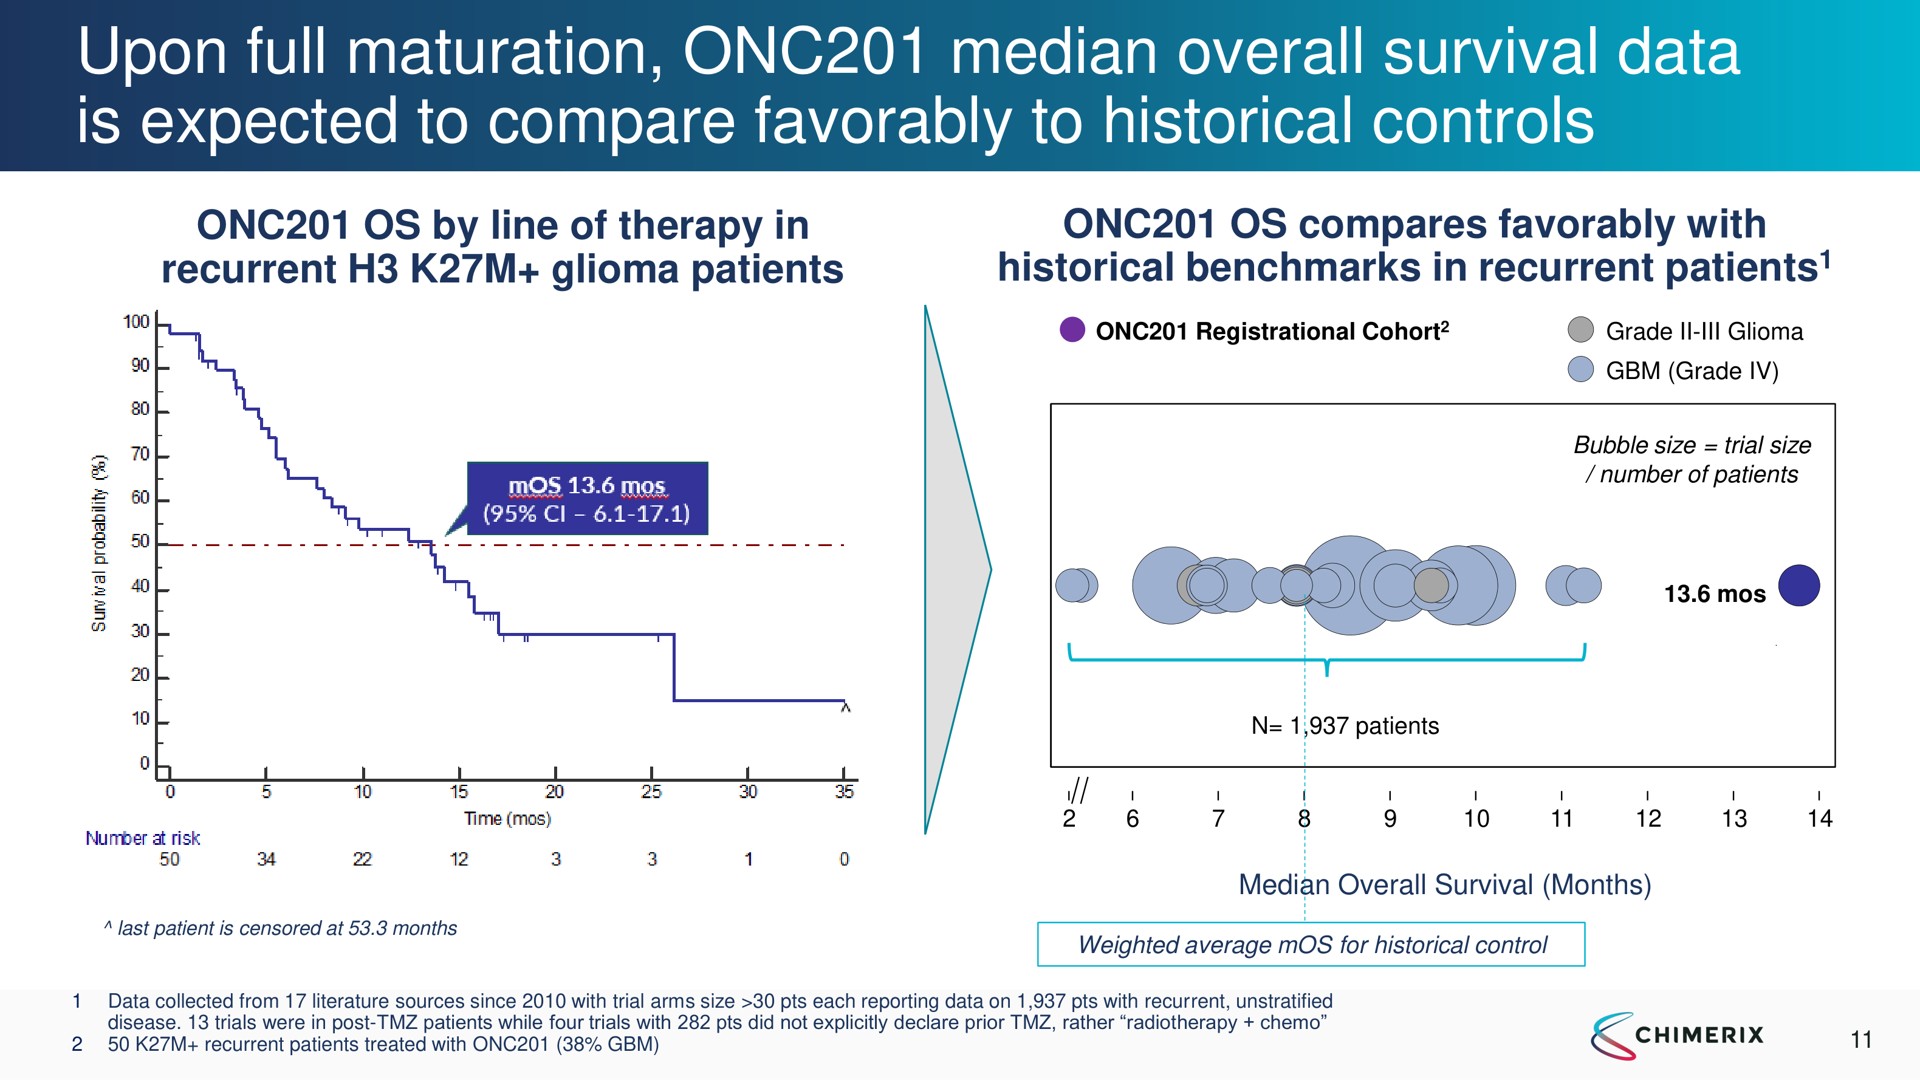 upon full maturation median overall survival data is expected to compare favorably to historical controls | Chimerix